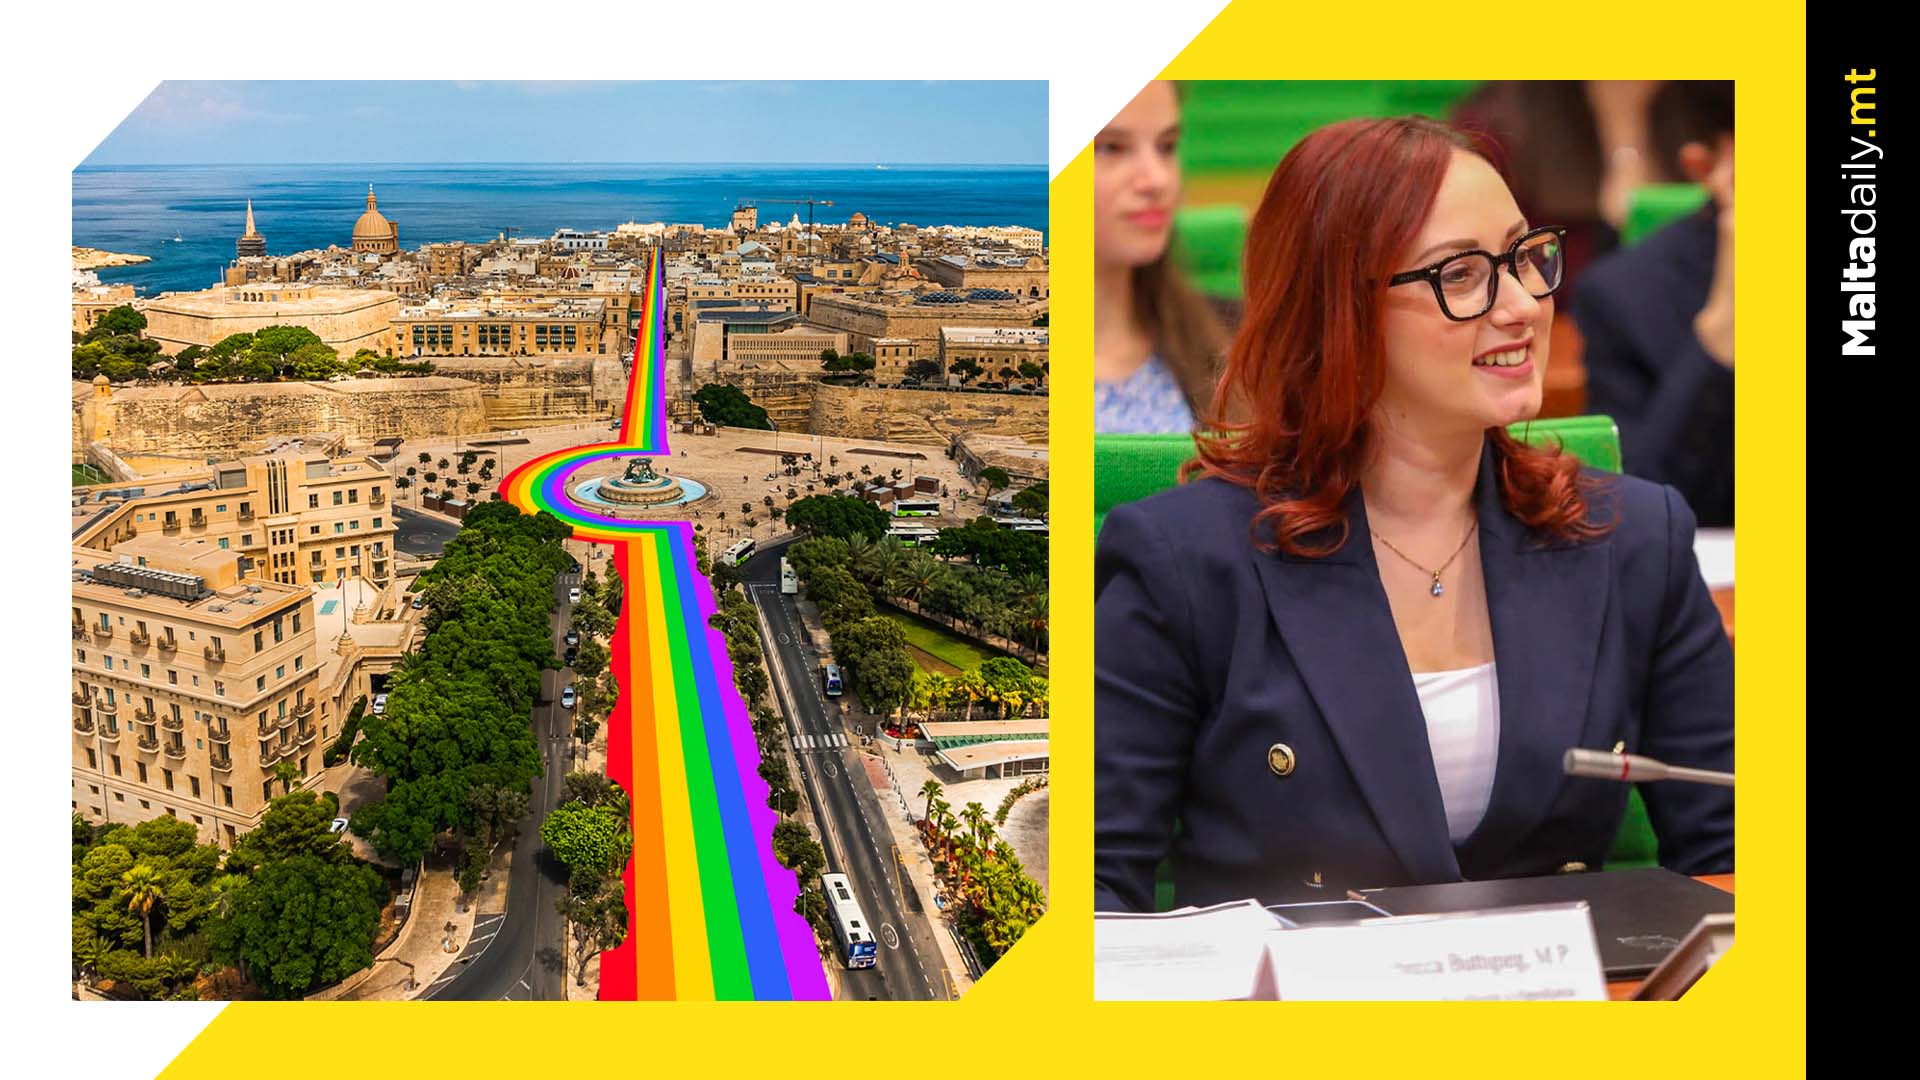 Malta recognised as one of Europe's LGBTIQ+ friendliest countries